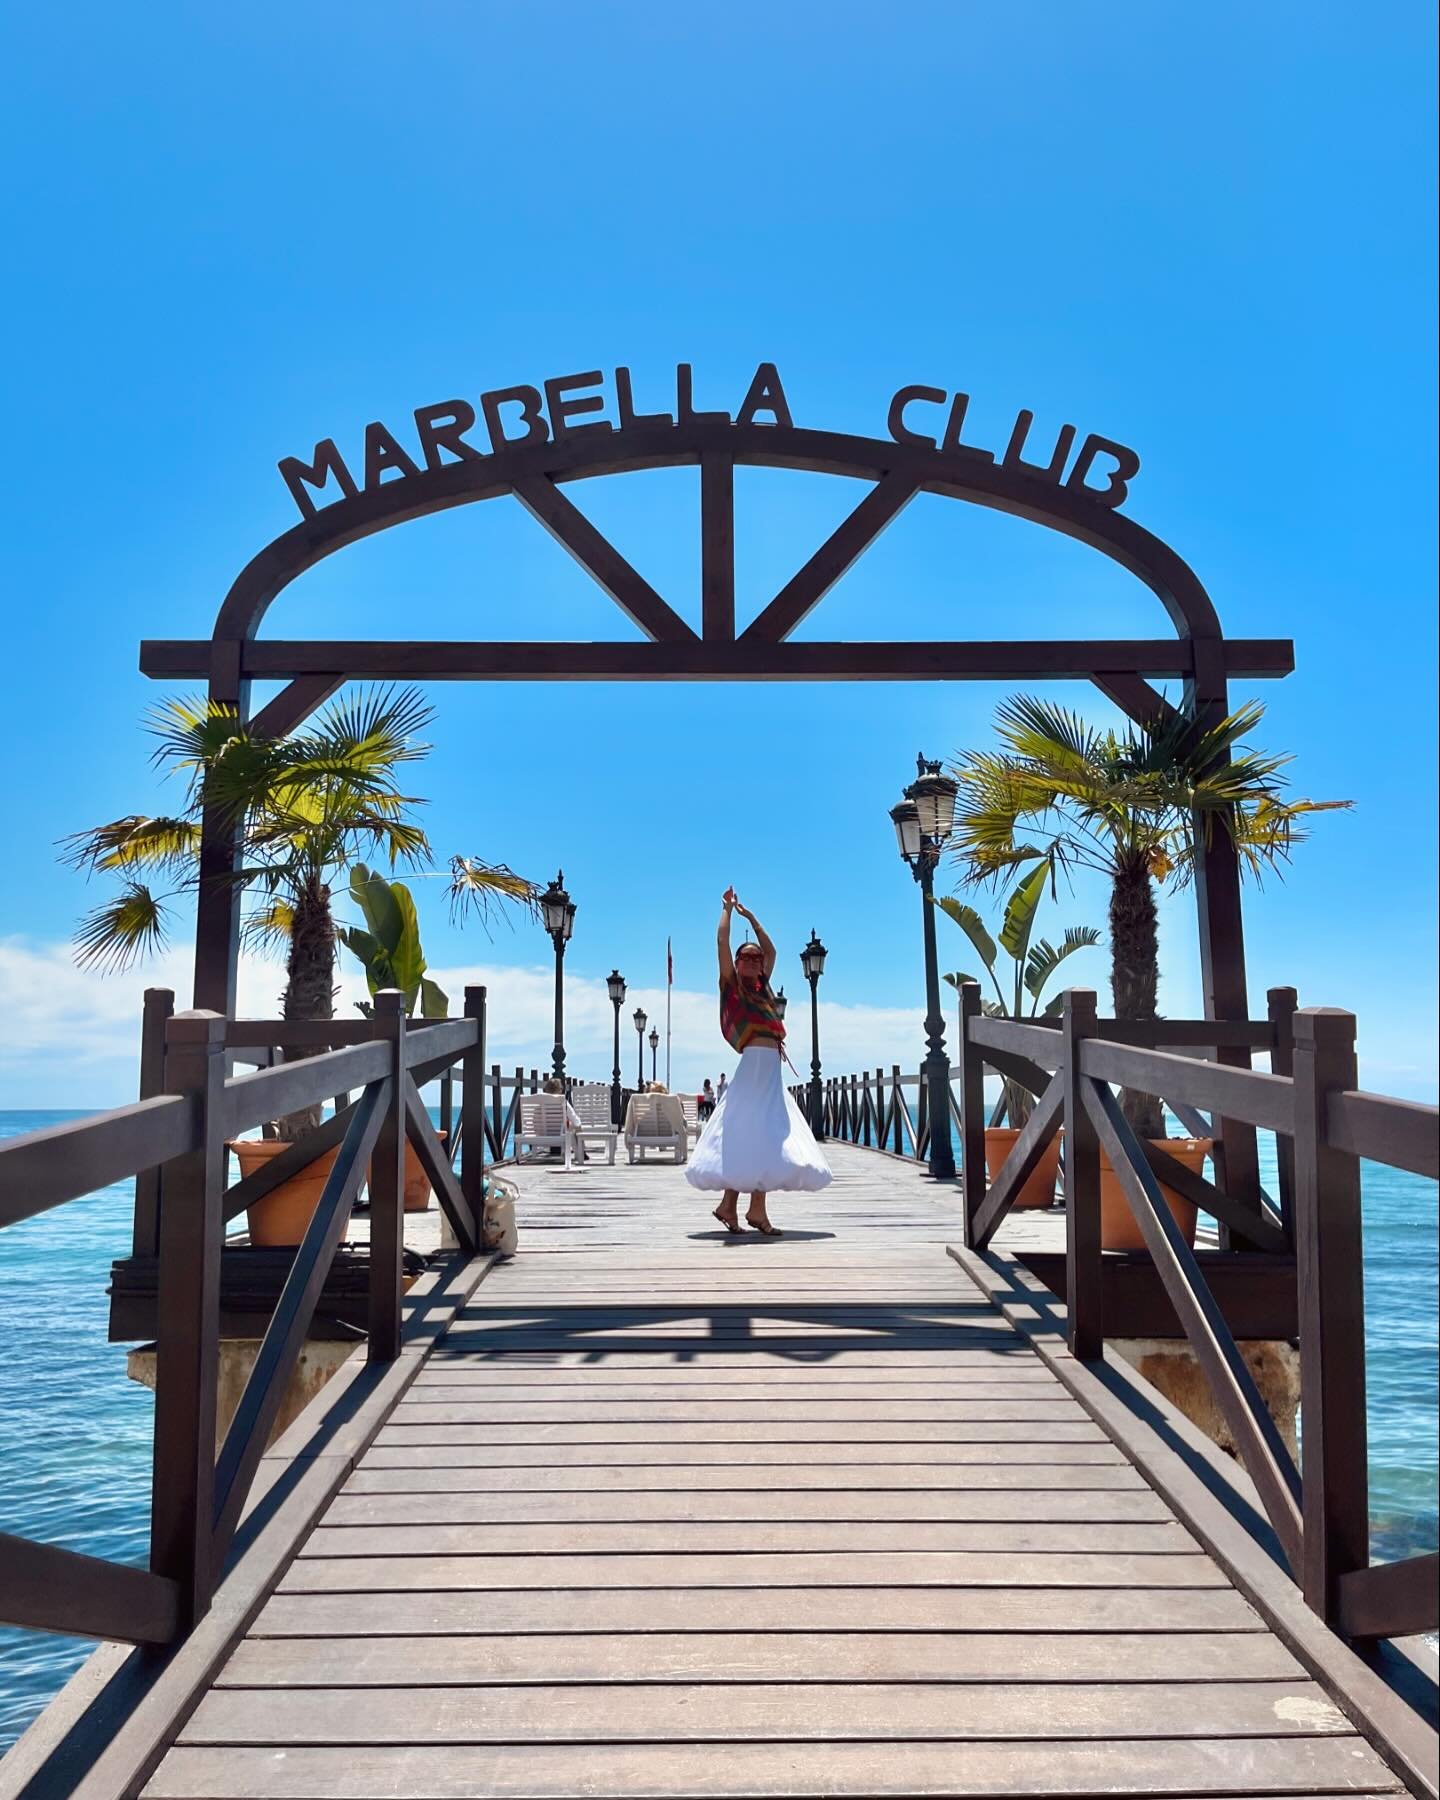 I have loved every corner and would never get enough!! @marbellaclubh #mch70 🦞🌞🌊

1. The vibe all weekend 
2. Marbella Club by @n_foulkes 
3. A hidden paradise @mch_wellness 
4. Best welcome to by Mimi (🐈)
5. Where do plates end and food begins? 